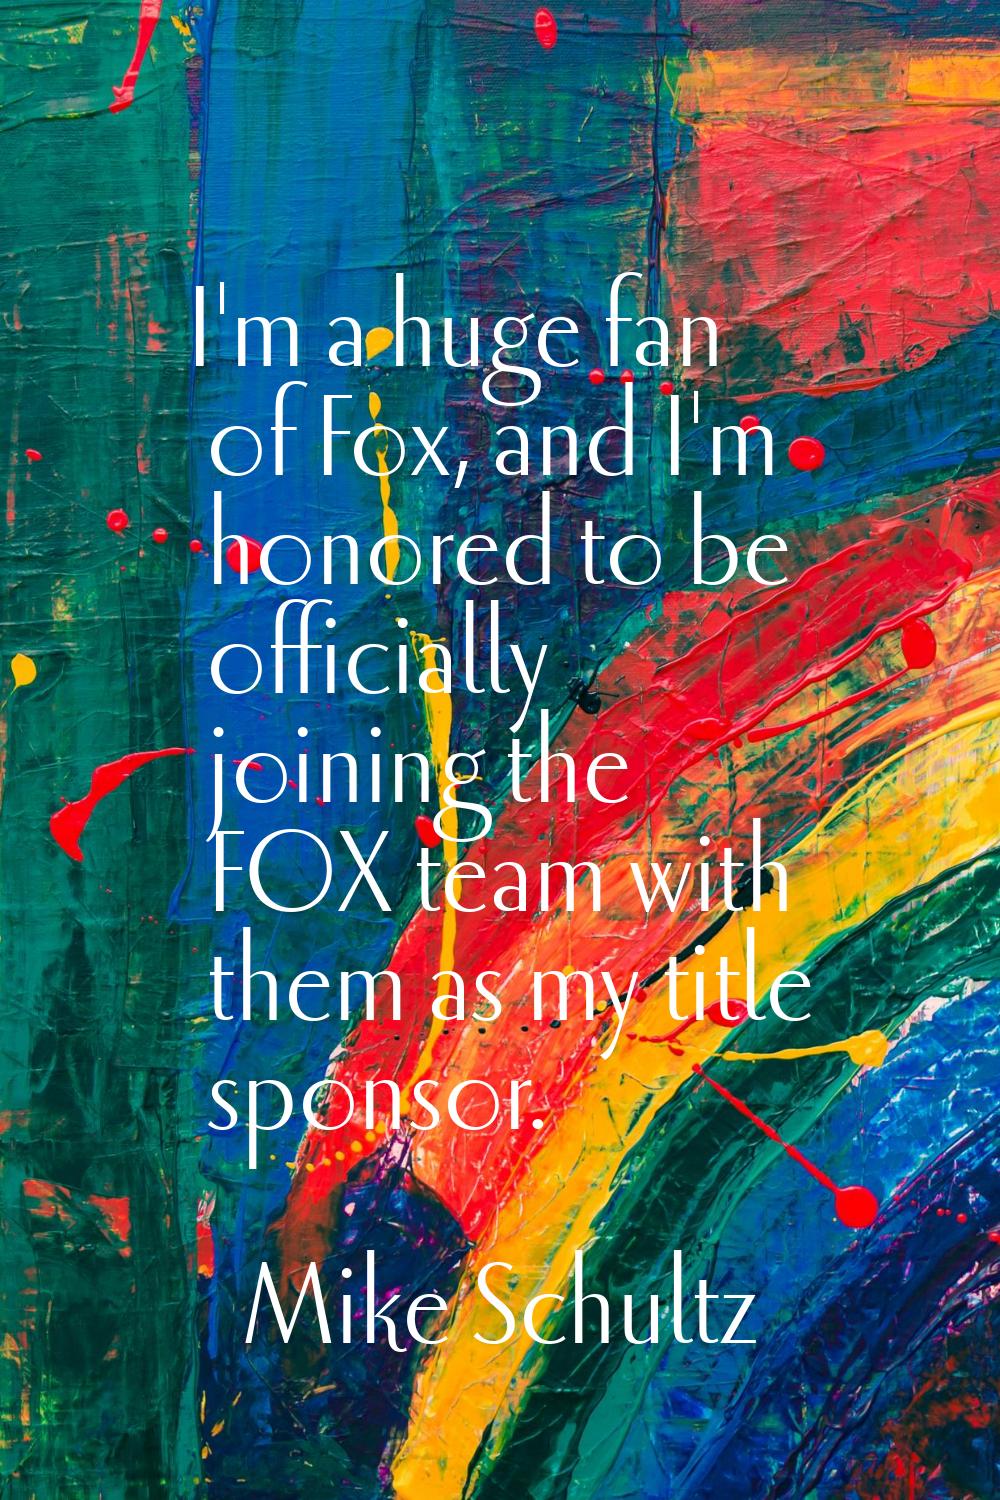 I'm a huge fan of Fox, and I'm honored to be officially joining the FOX team with them as my title 